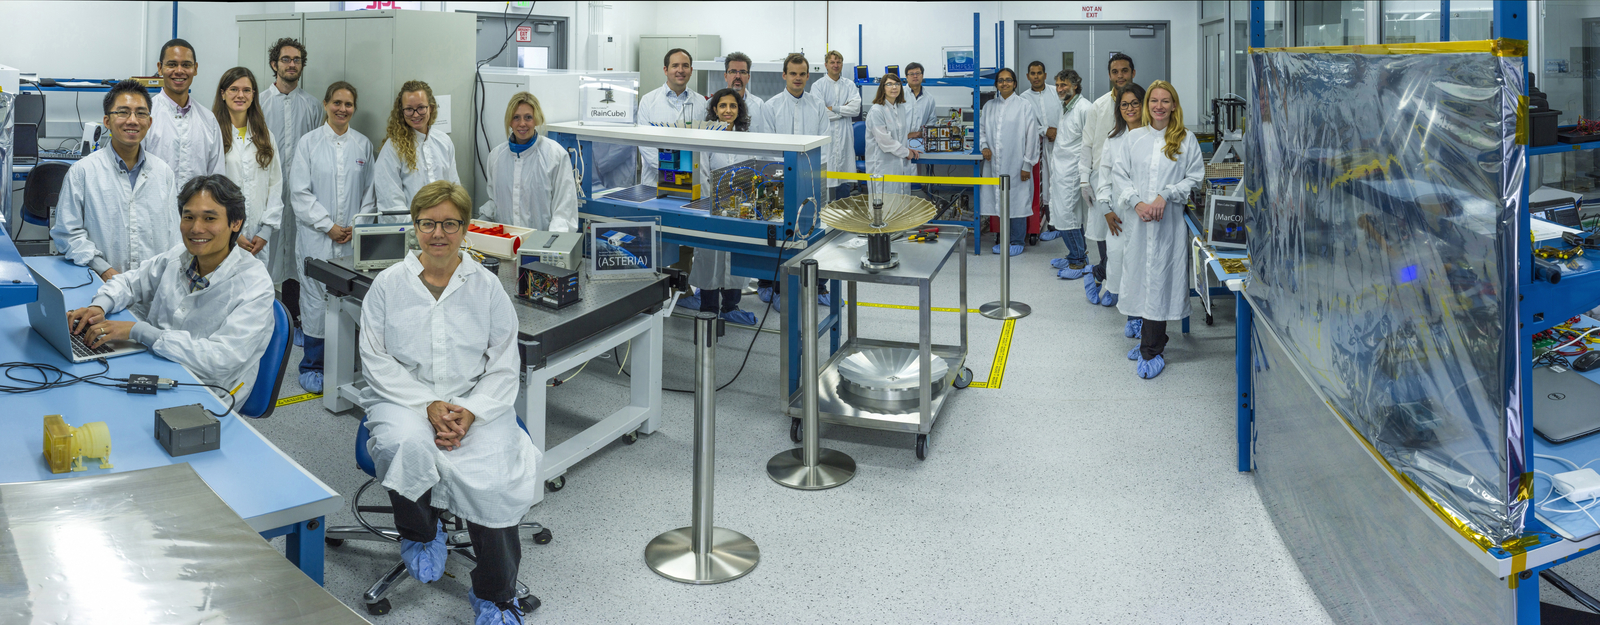 JPL's Integrated CubeSat Development Laboratory is 1,250 square feet of pristine tabletops and freshly scrubbed air dedicated to the manufacture and testing of CubeSat spacecraft. Four different CubeSat mission teams can utilize the clean room at the same time.